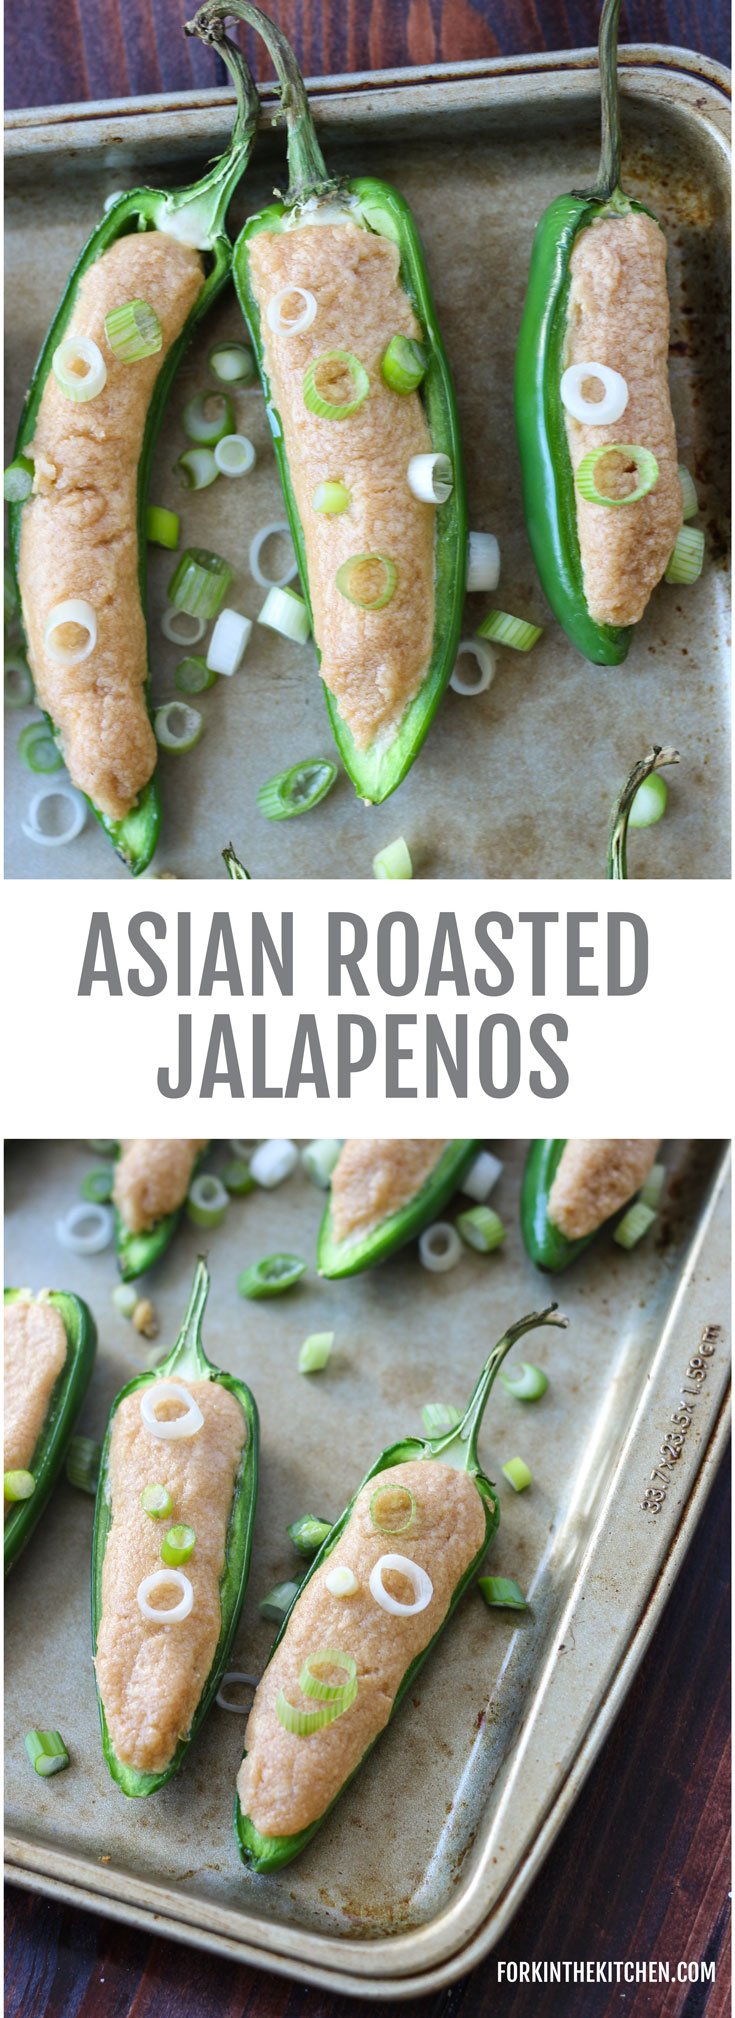 Asian Roasted Jalapenos - an excellent two-bite appetizer, spicy and creamy all in one! // Fork in the Kitchen